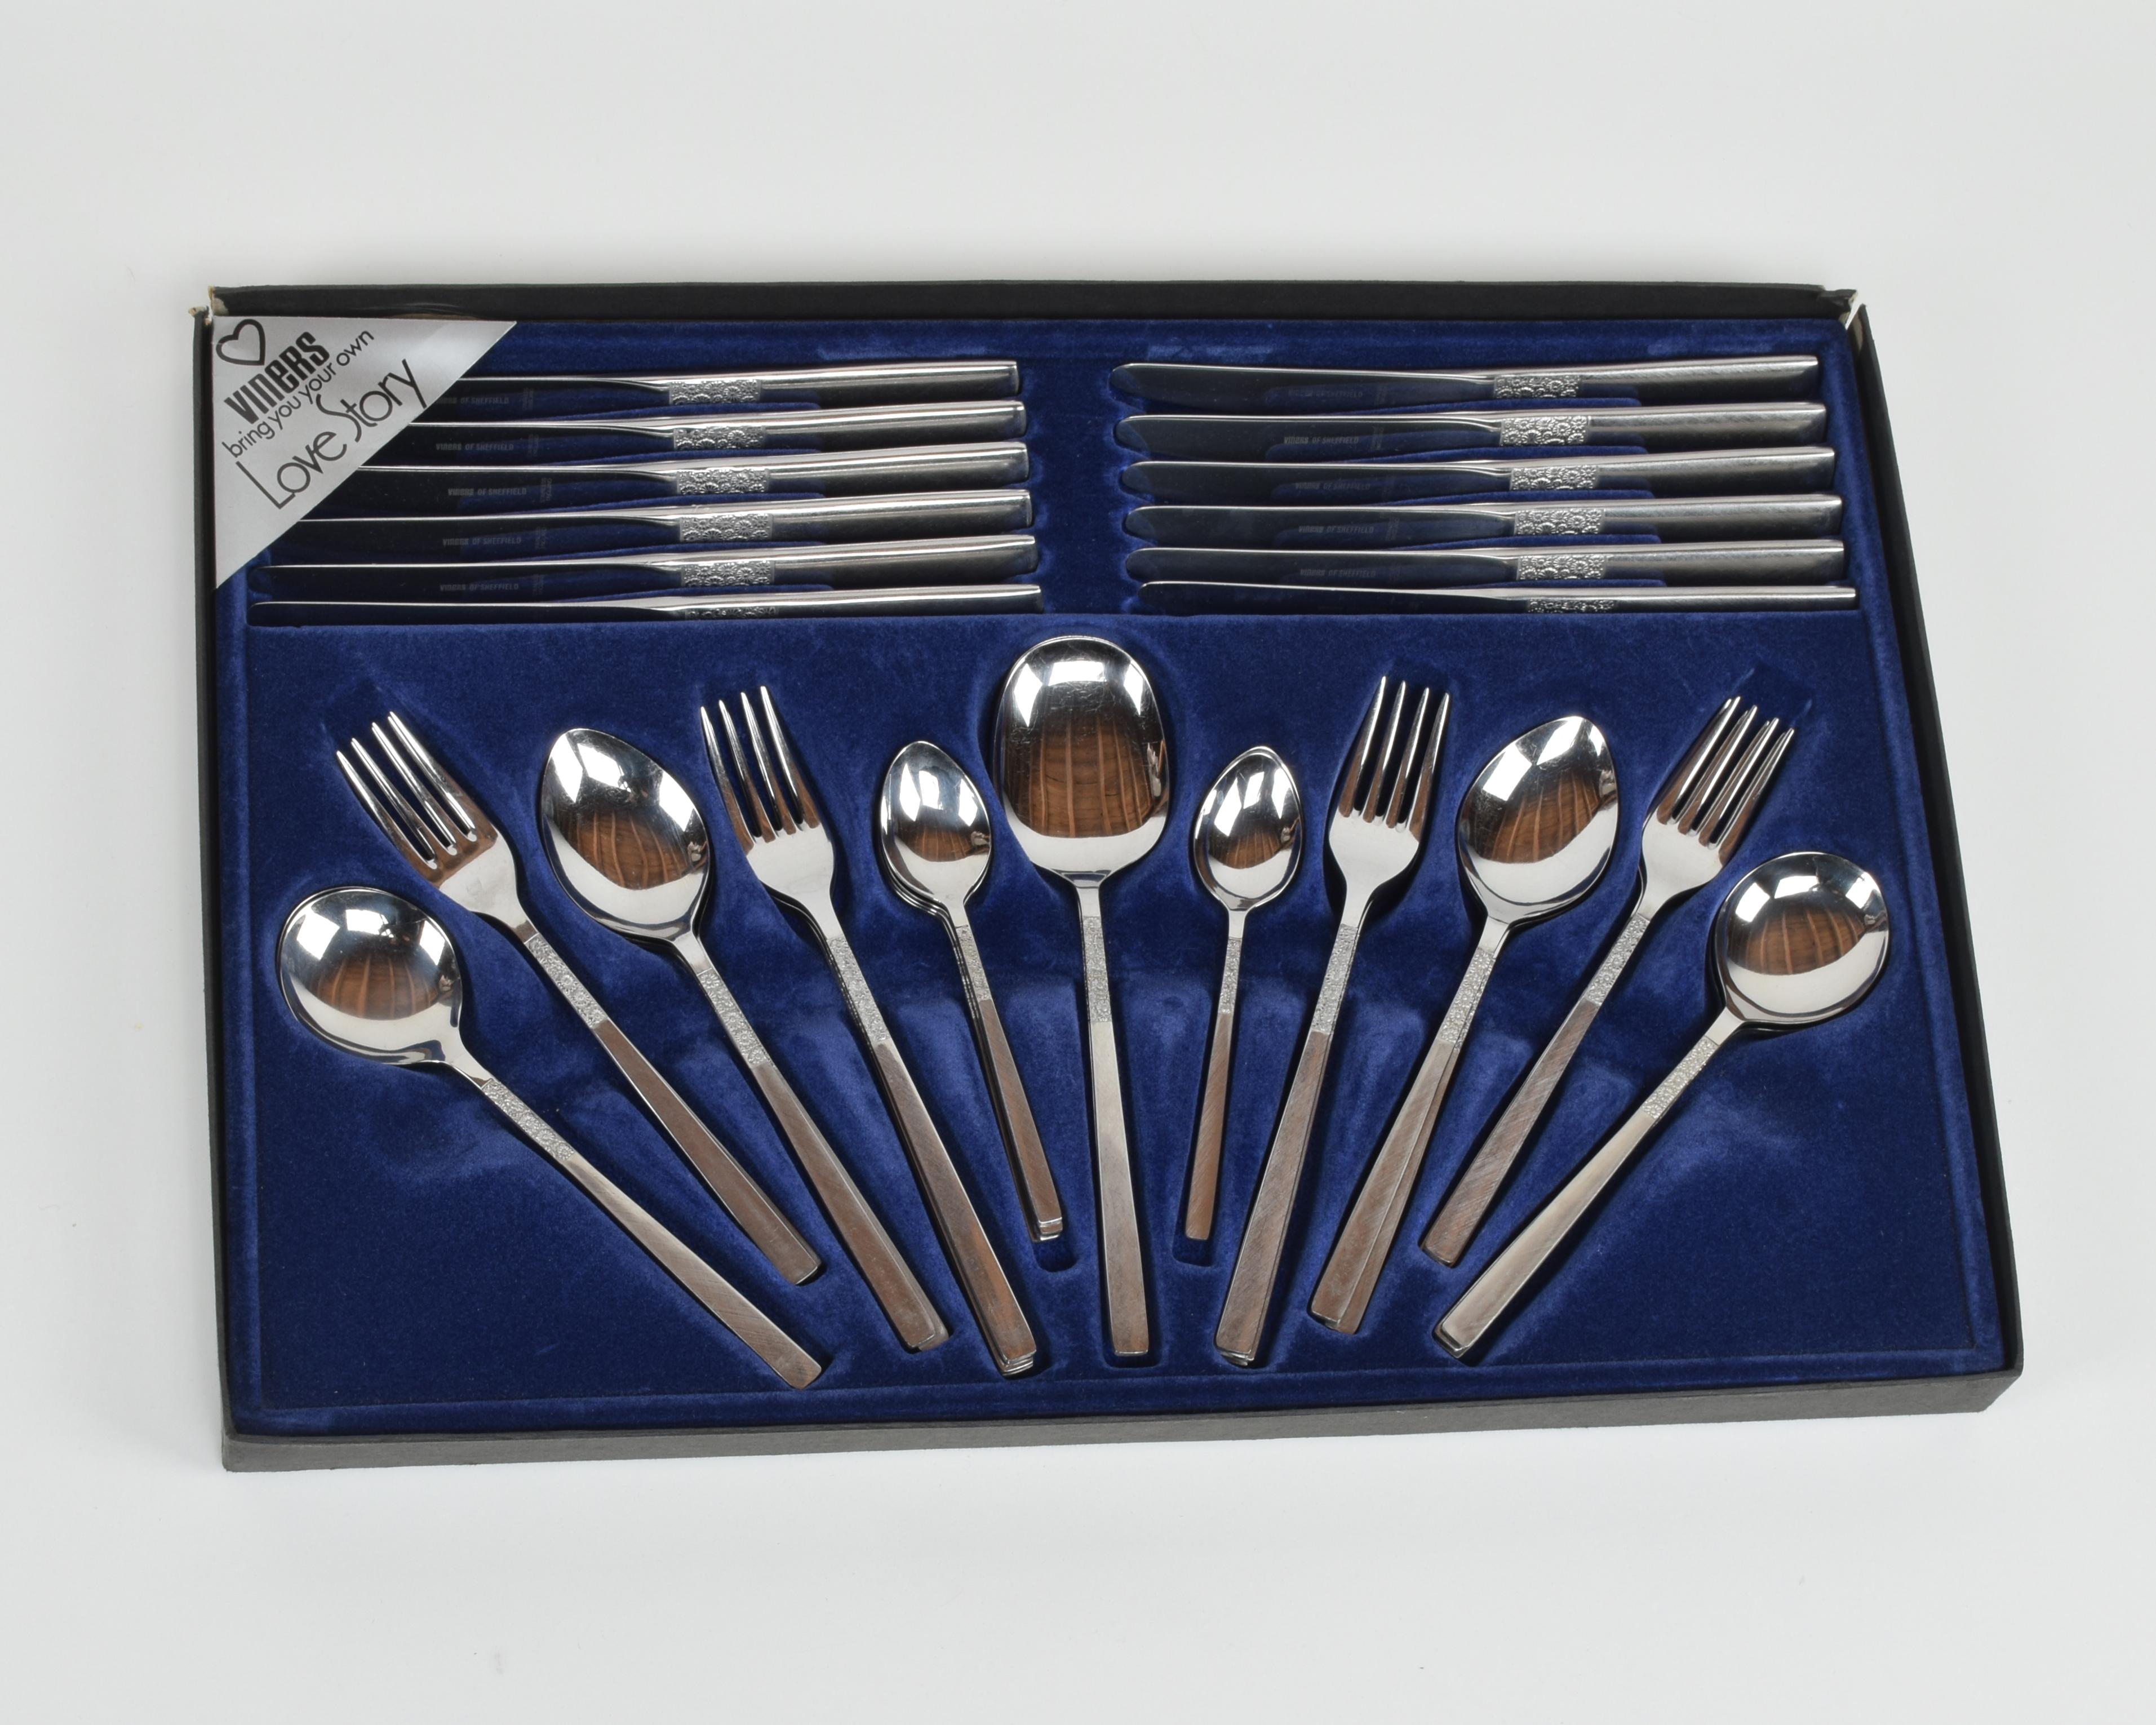 Viners, UK (manufacturer)
‘Love story by Viners′ cutlery, Presentation Set, boxed (44 pieces), 1970s

6 x Large knifes
6 x Small knifes
6 x Large forks
6 x Small forks
2 x Serving spoons
6 x Soup spoons
6 x Dessert spoons
6 x Tea spoons

Stainless